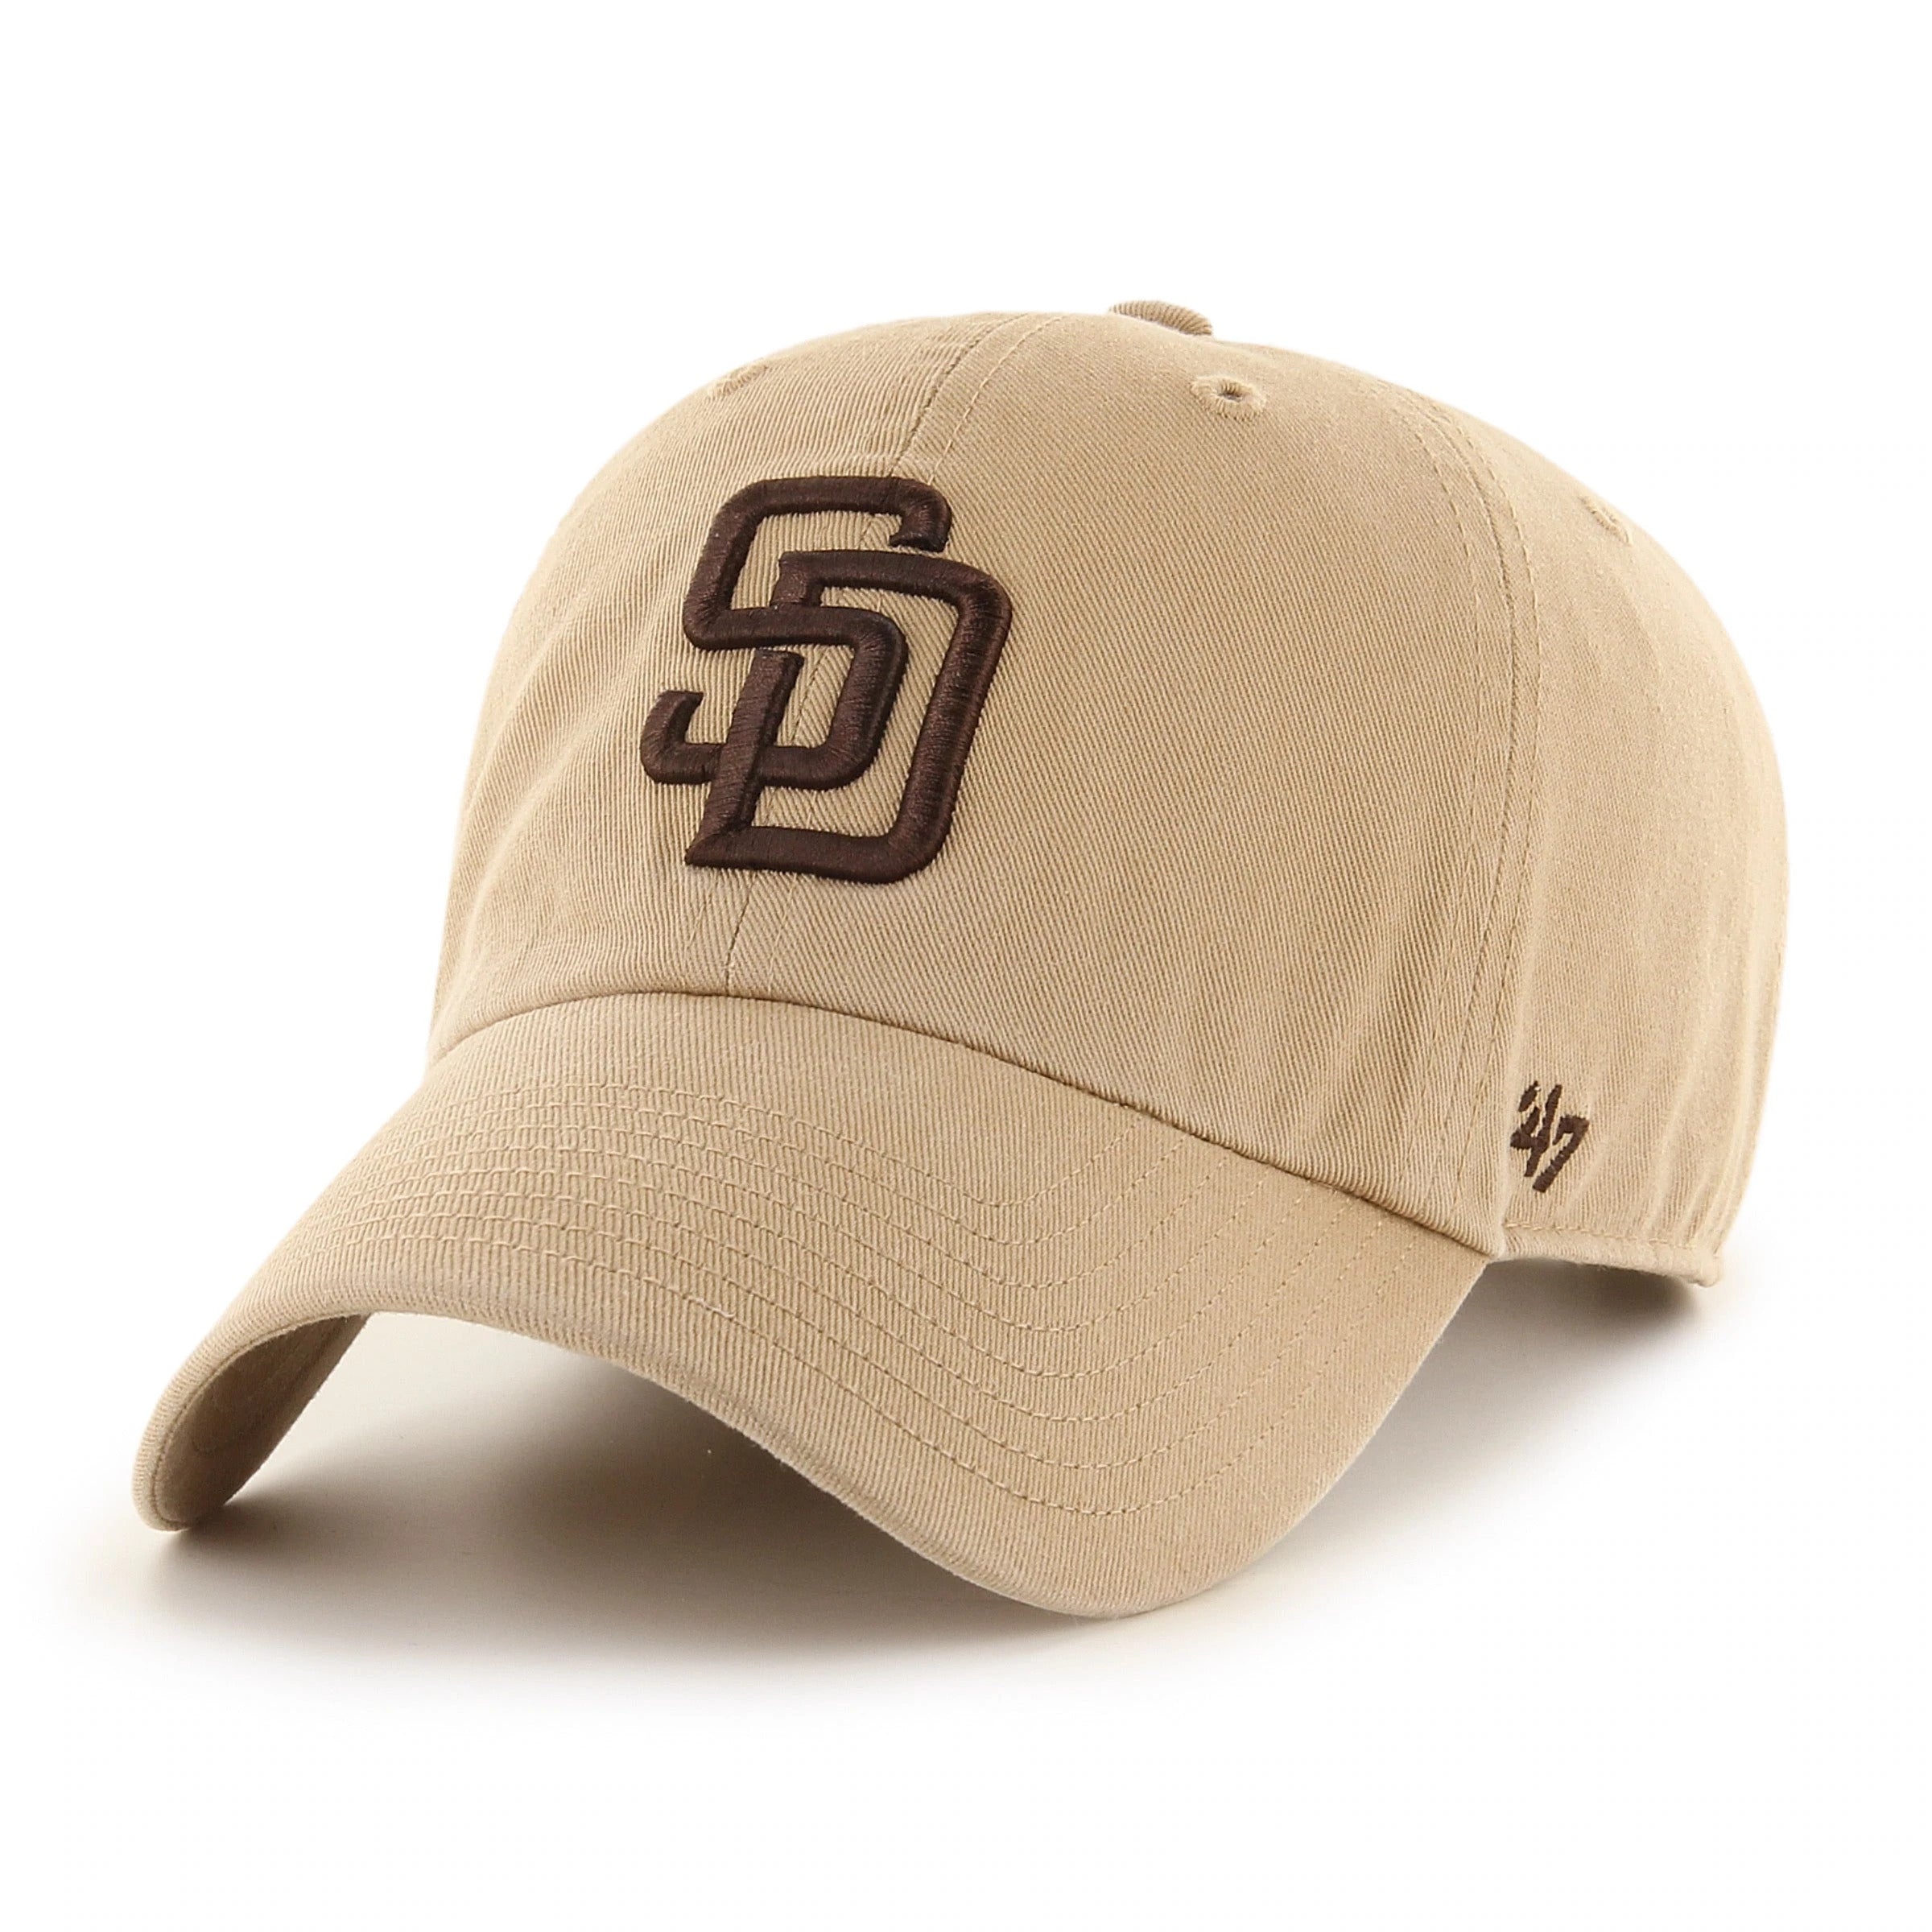  '47 MLB Camo Clean Up Adjustable Hat, Adult One Size Fits All  (as1, Alpha, one_Size, San Diego Padres) : Sports & Outdoors